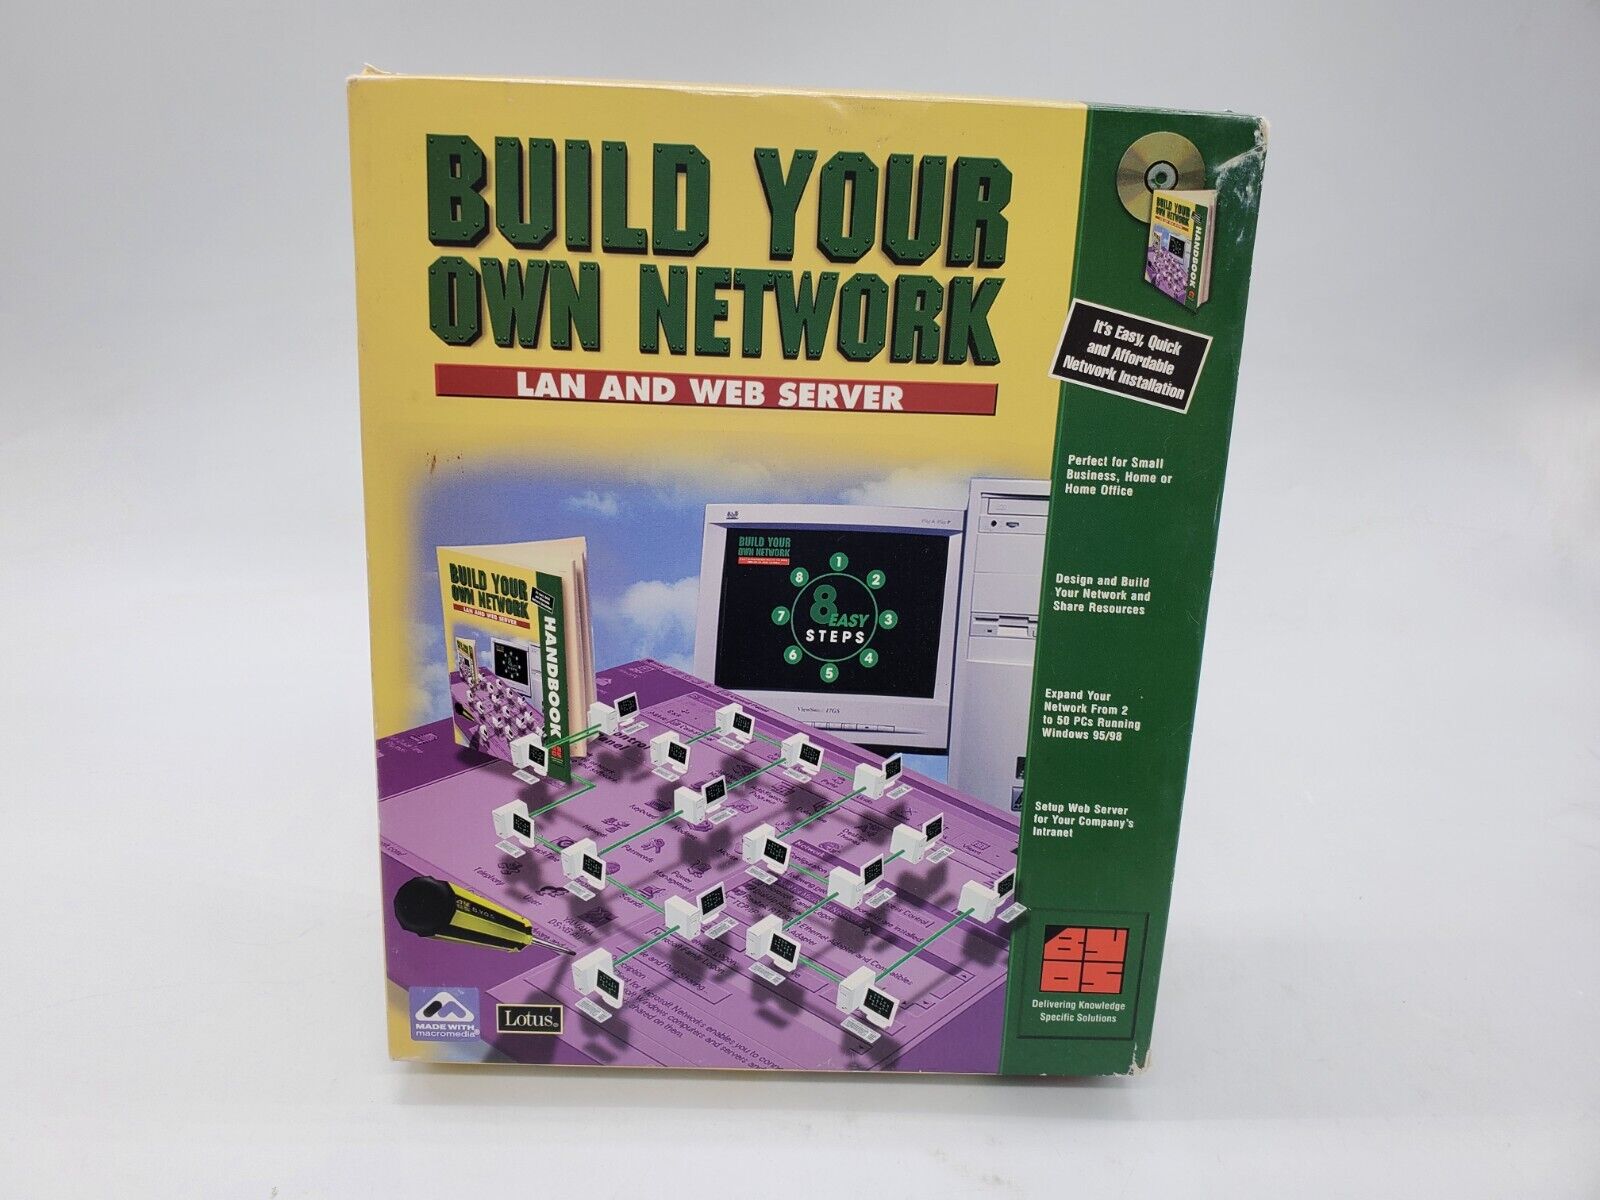 Build Your Own Network - Lan and Web Server CD-ROM by BYOS Vintage